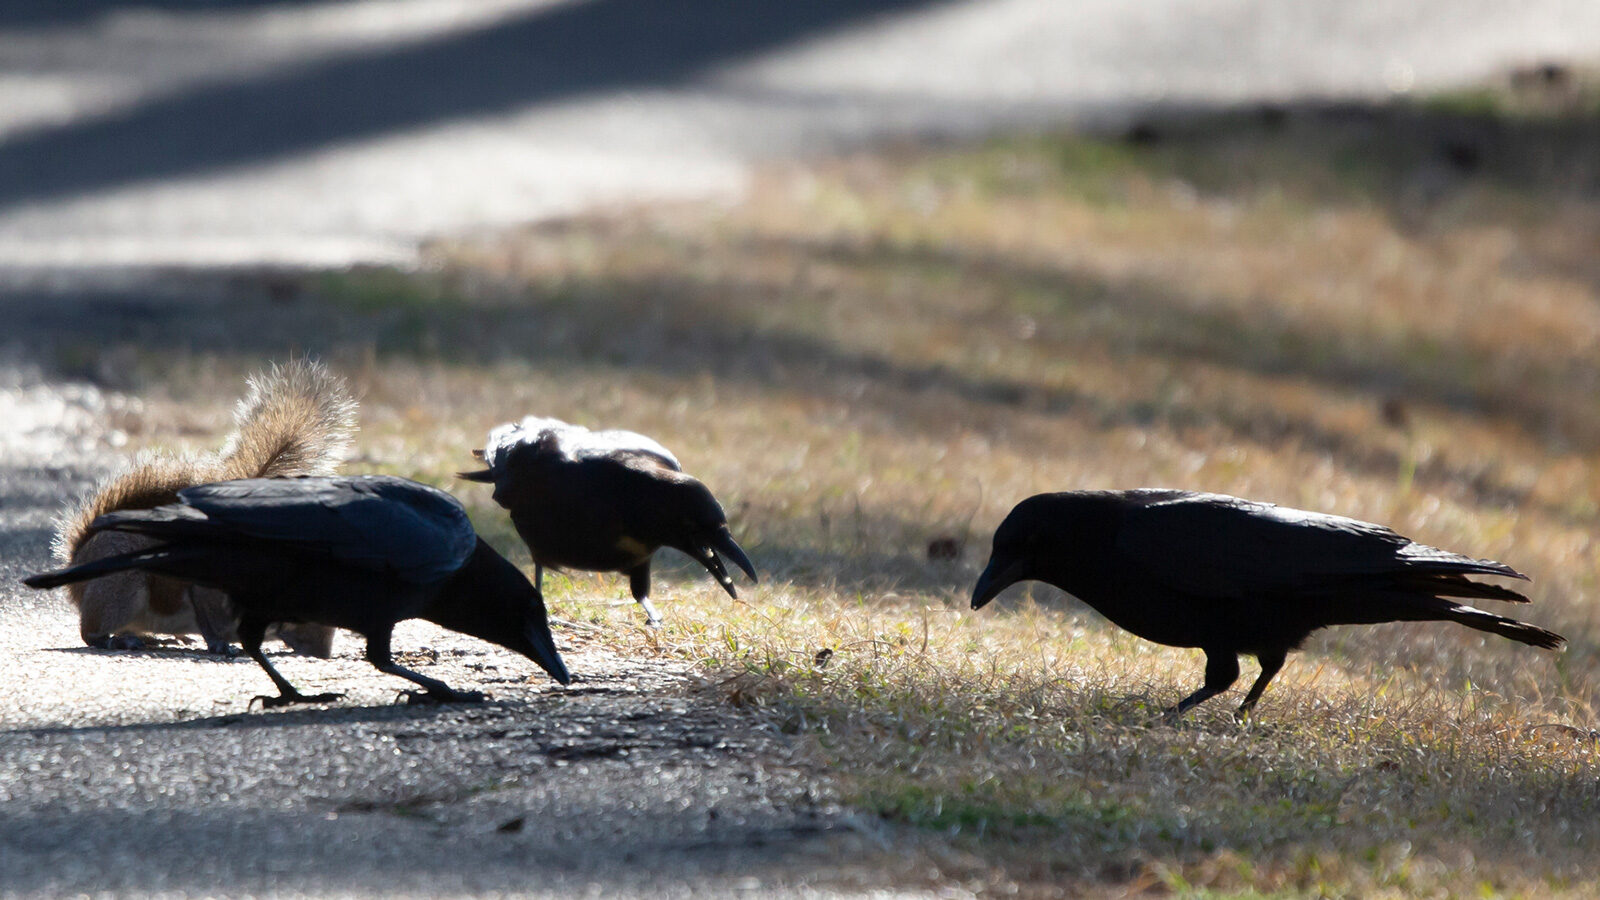 American crows foraging with an eastern gray squirrel on the ground